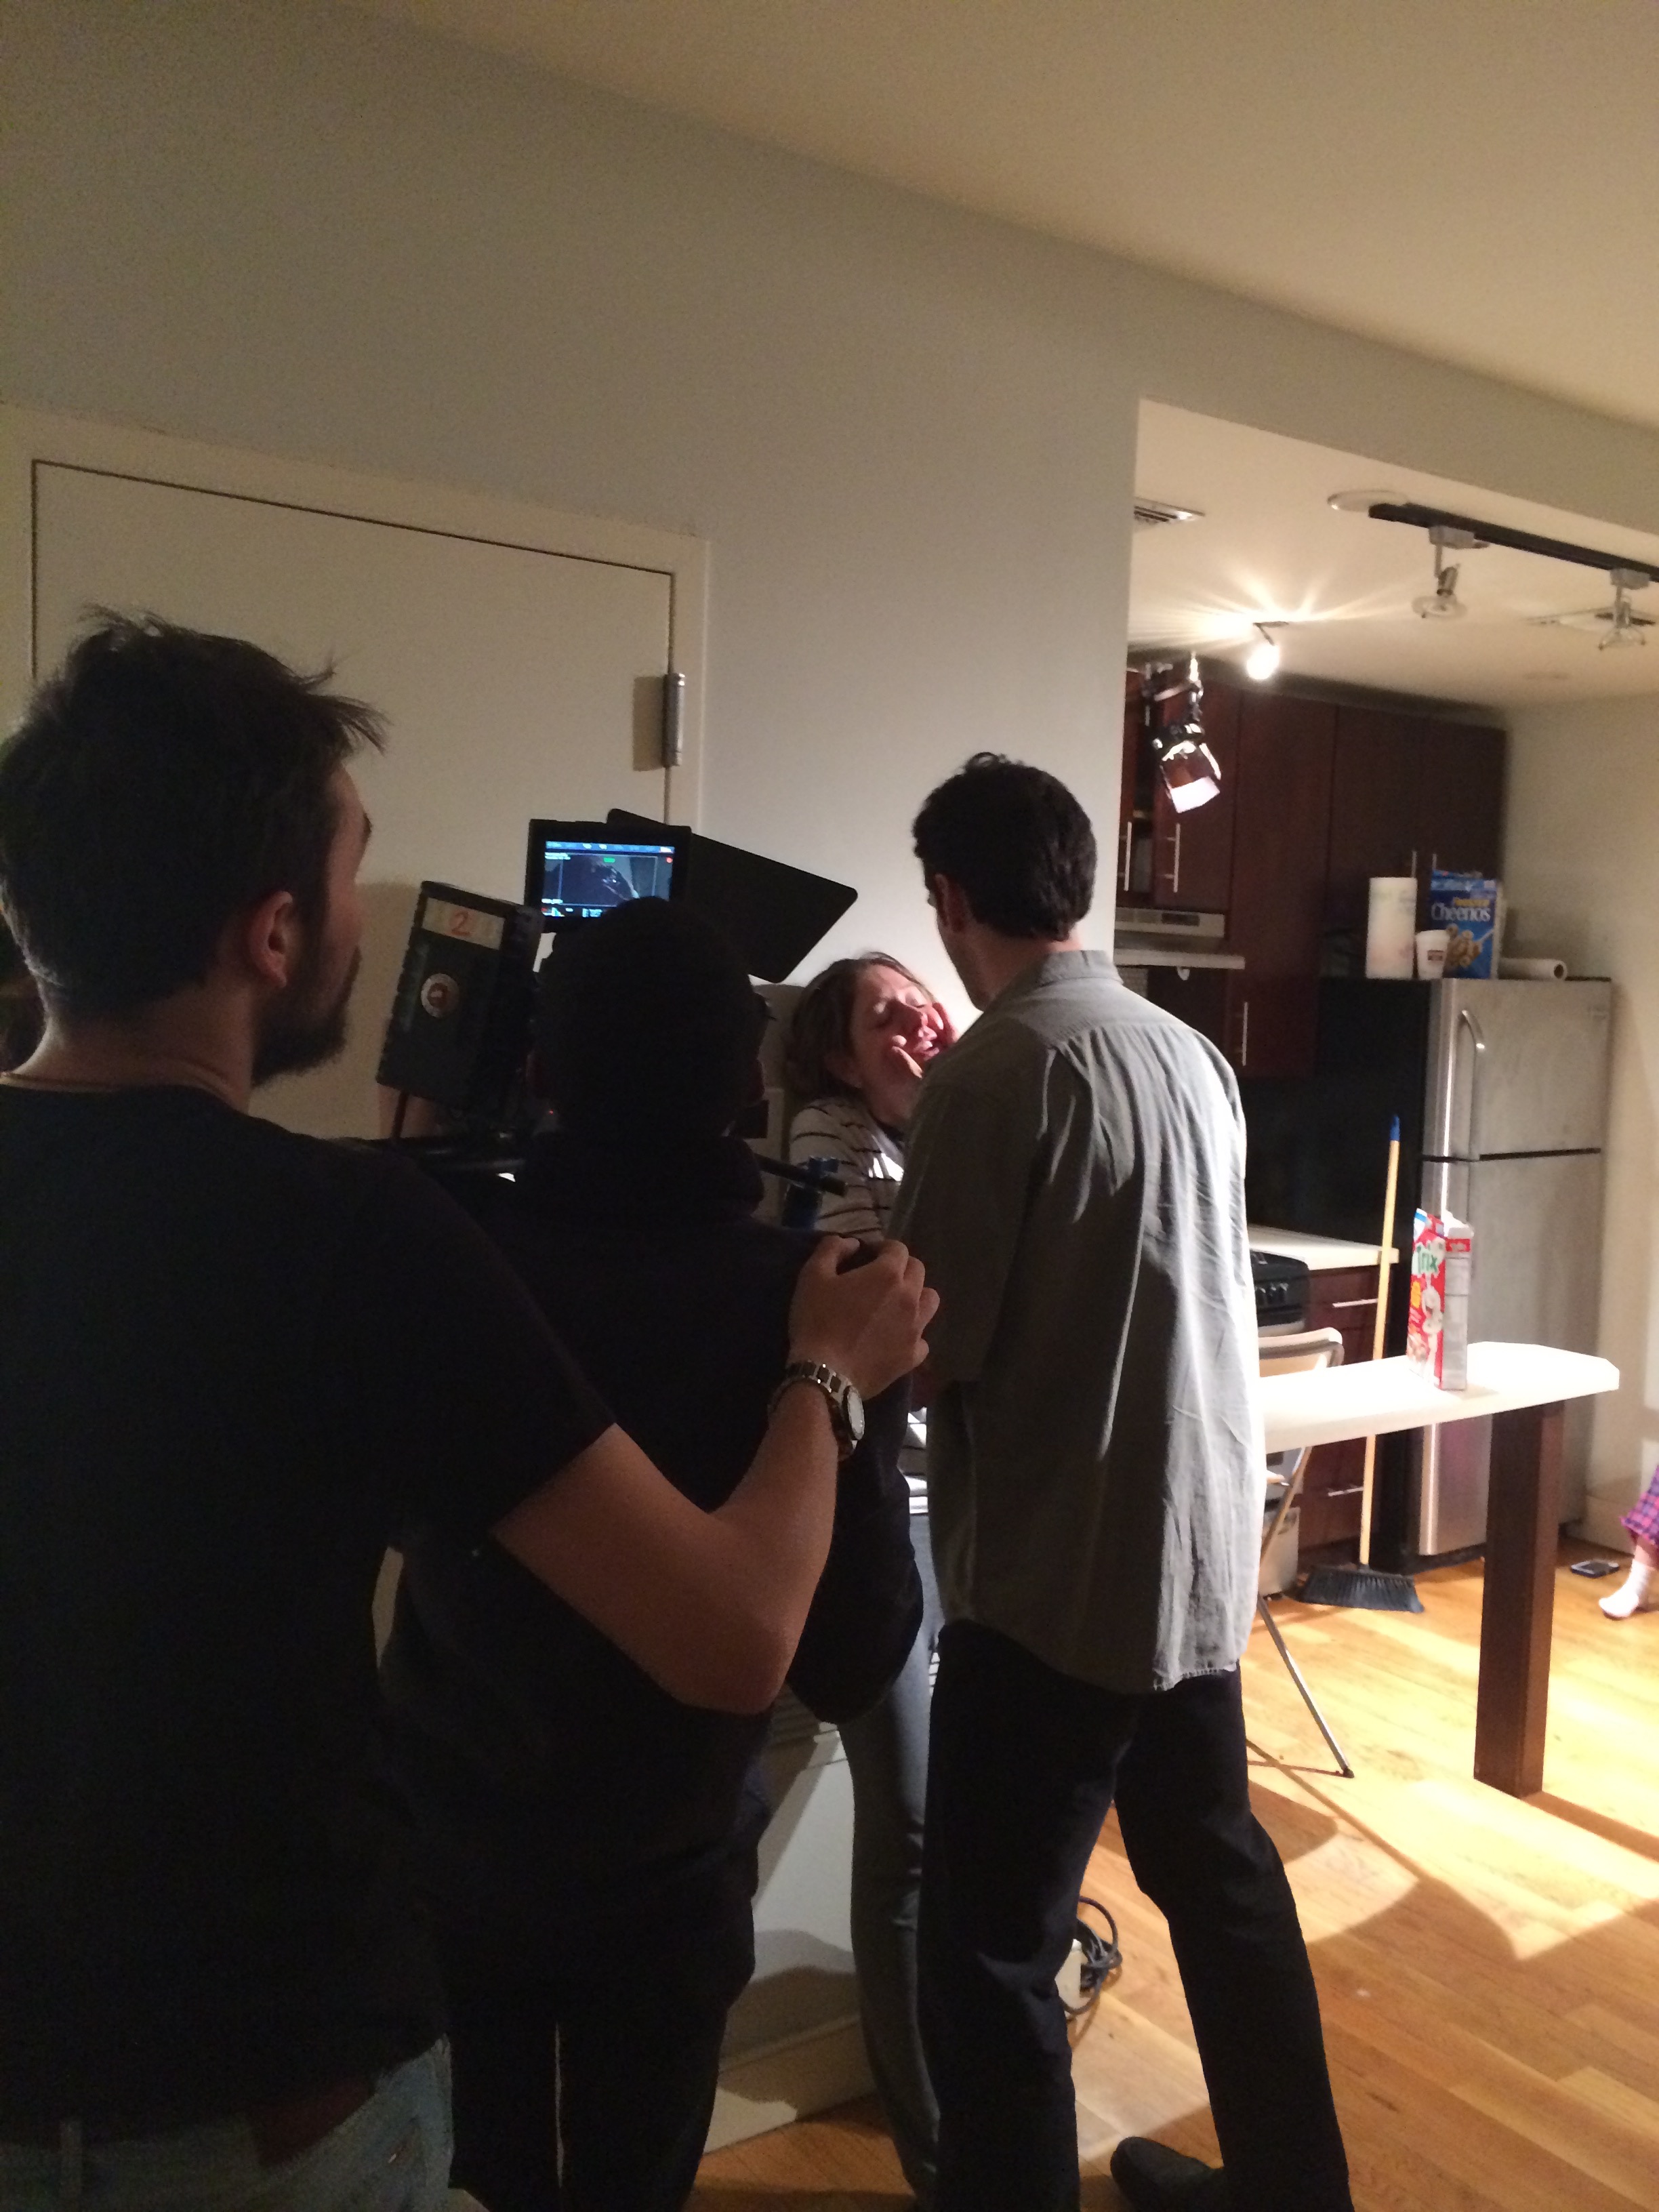 Shooting a domestic Violence Awareness commercial